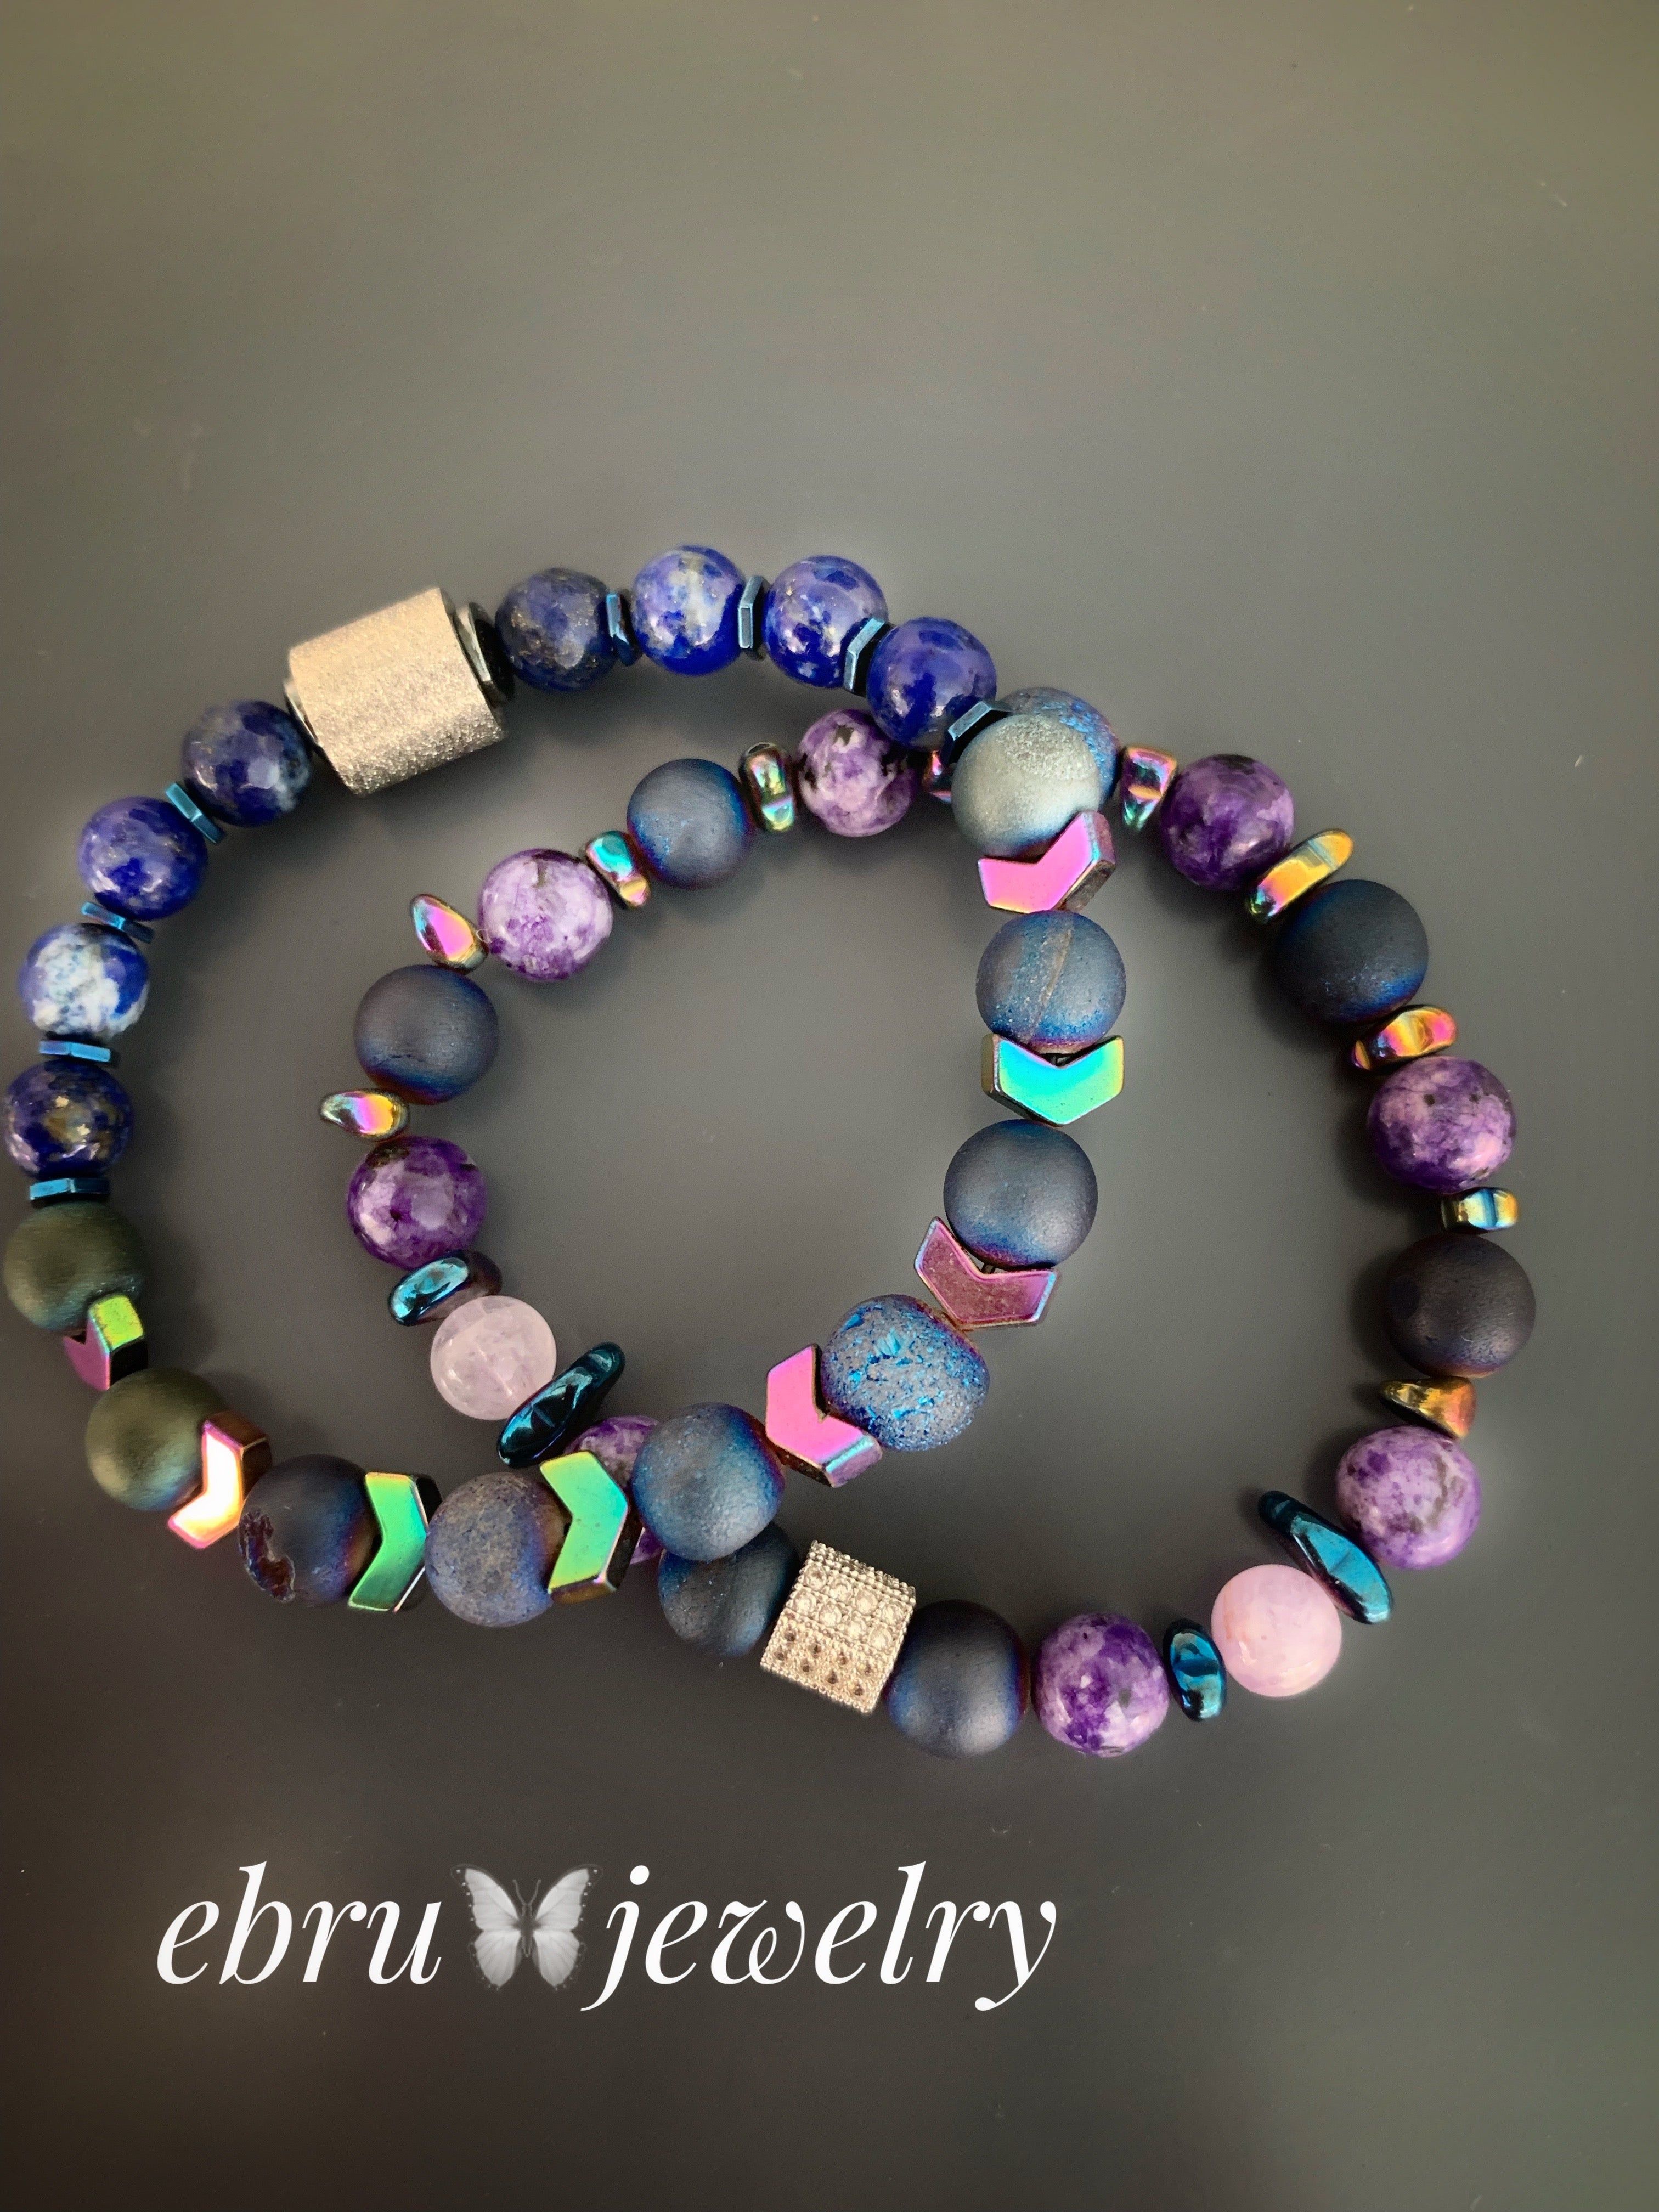 Discover the vibrant beauty of the Love Of Color Bracelets, featuring lapis lazuli, druzy agate, purple jade, and colorful hematite beads for a stylish and eye-catching look.